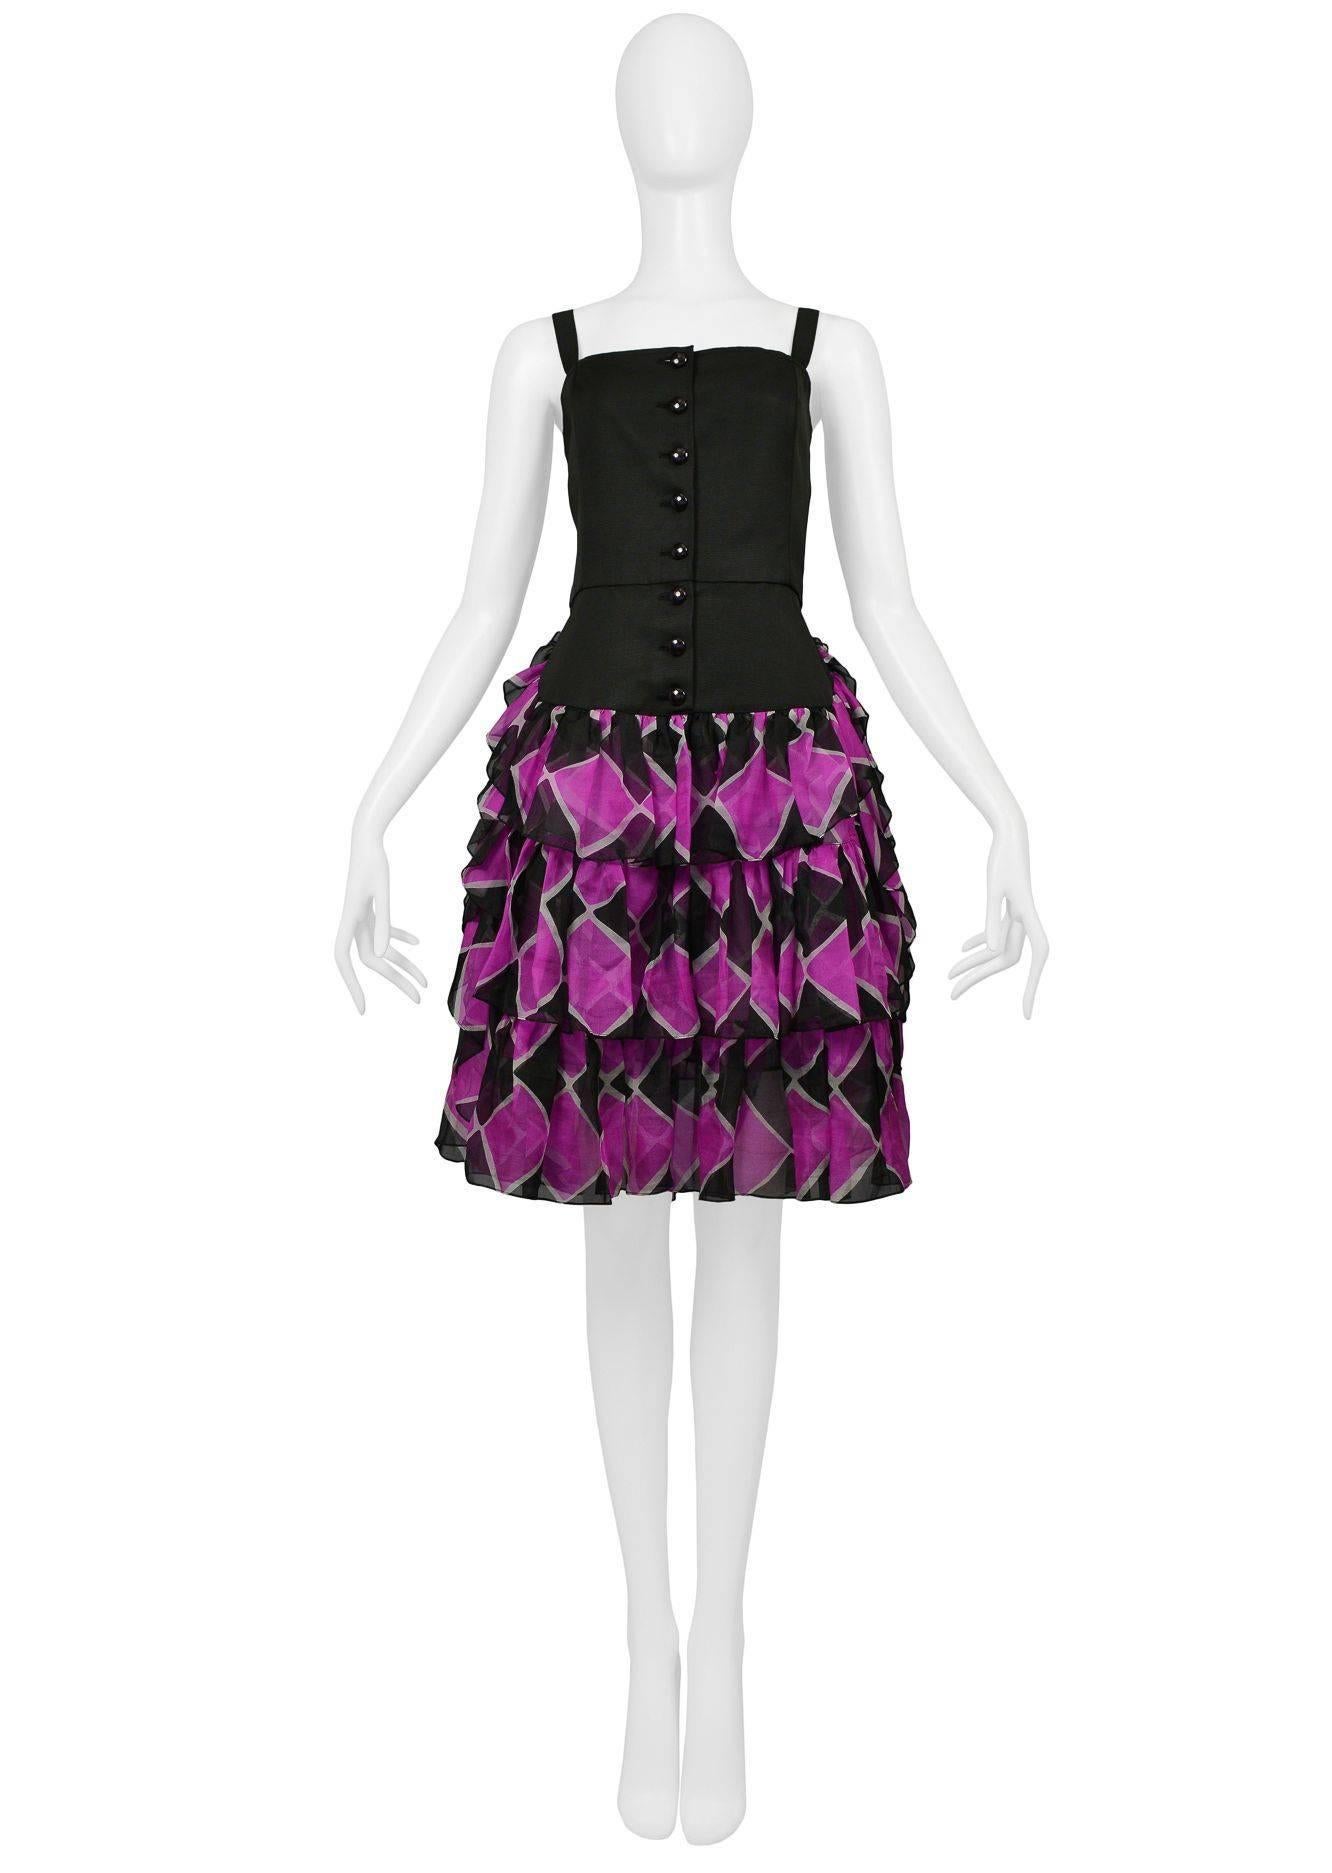 Vintage Yves Saint Laurent cotton black and magenta dress with black bodice and harlequin print skirt. Bodice features fitted waistline and button up front. Skirt features three ruffled tiers.